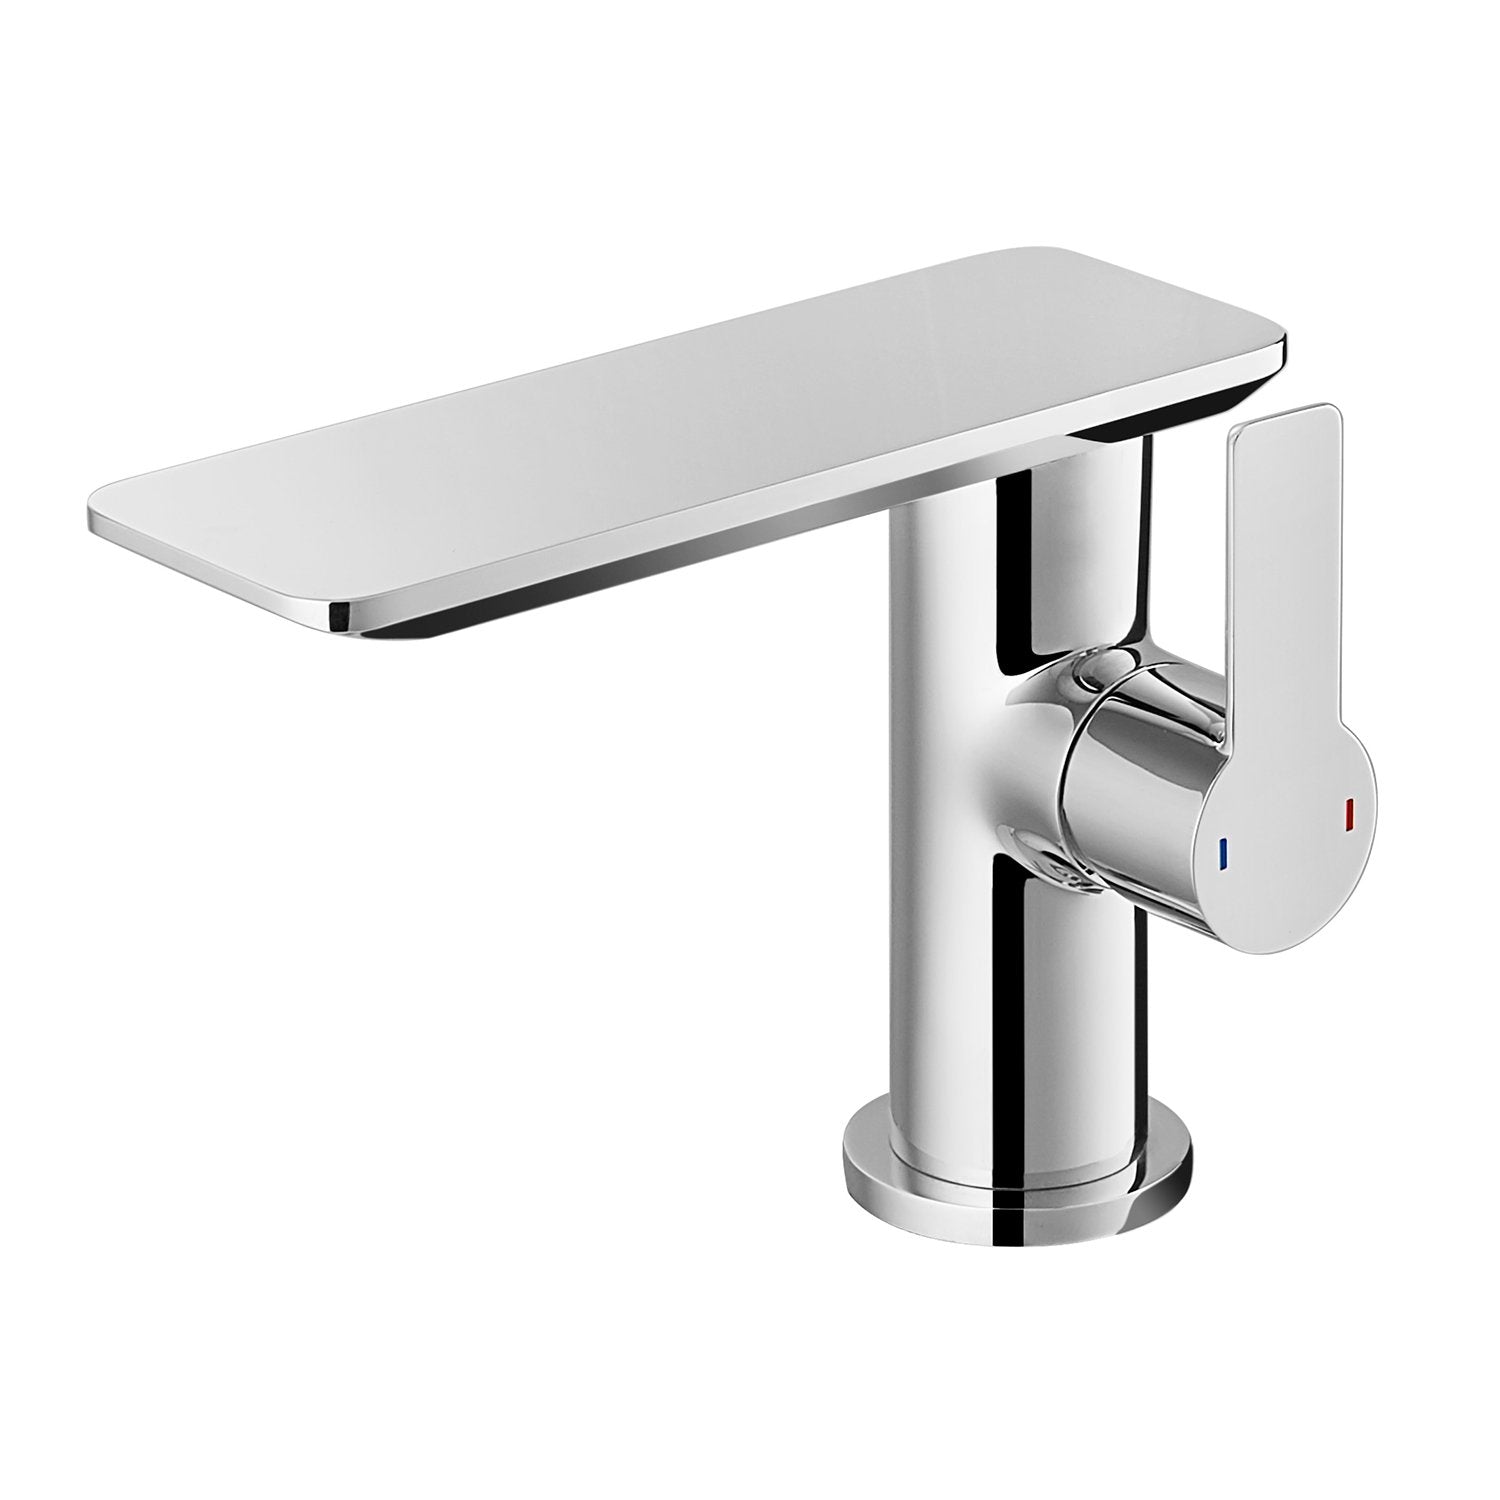 DAX Single Handle Bathroom Waterfall Faucet, Deck Mount, Brass Body, Chrome Finish, Spout Height 4-15/16 Inches (DAX-8205-CR)